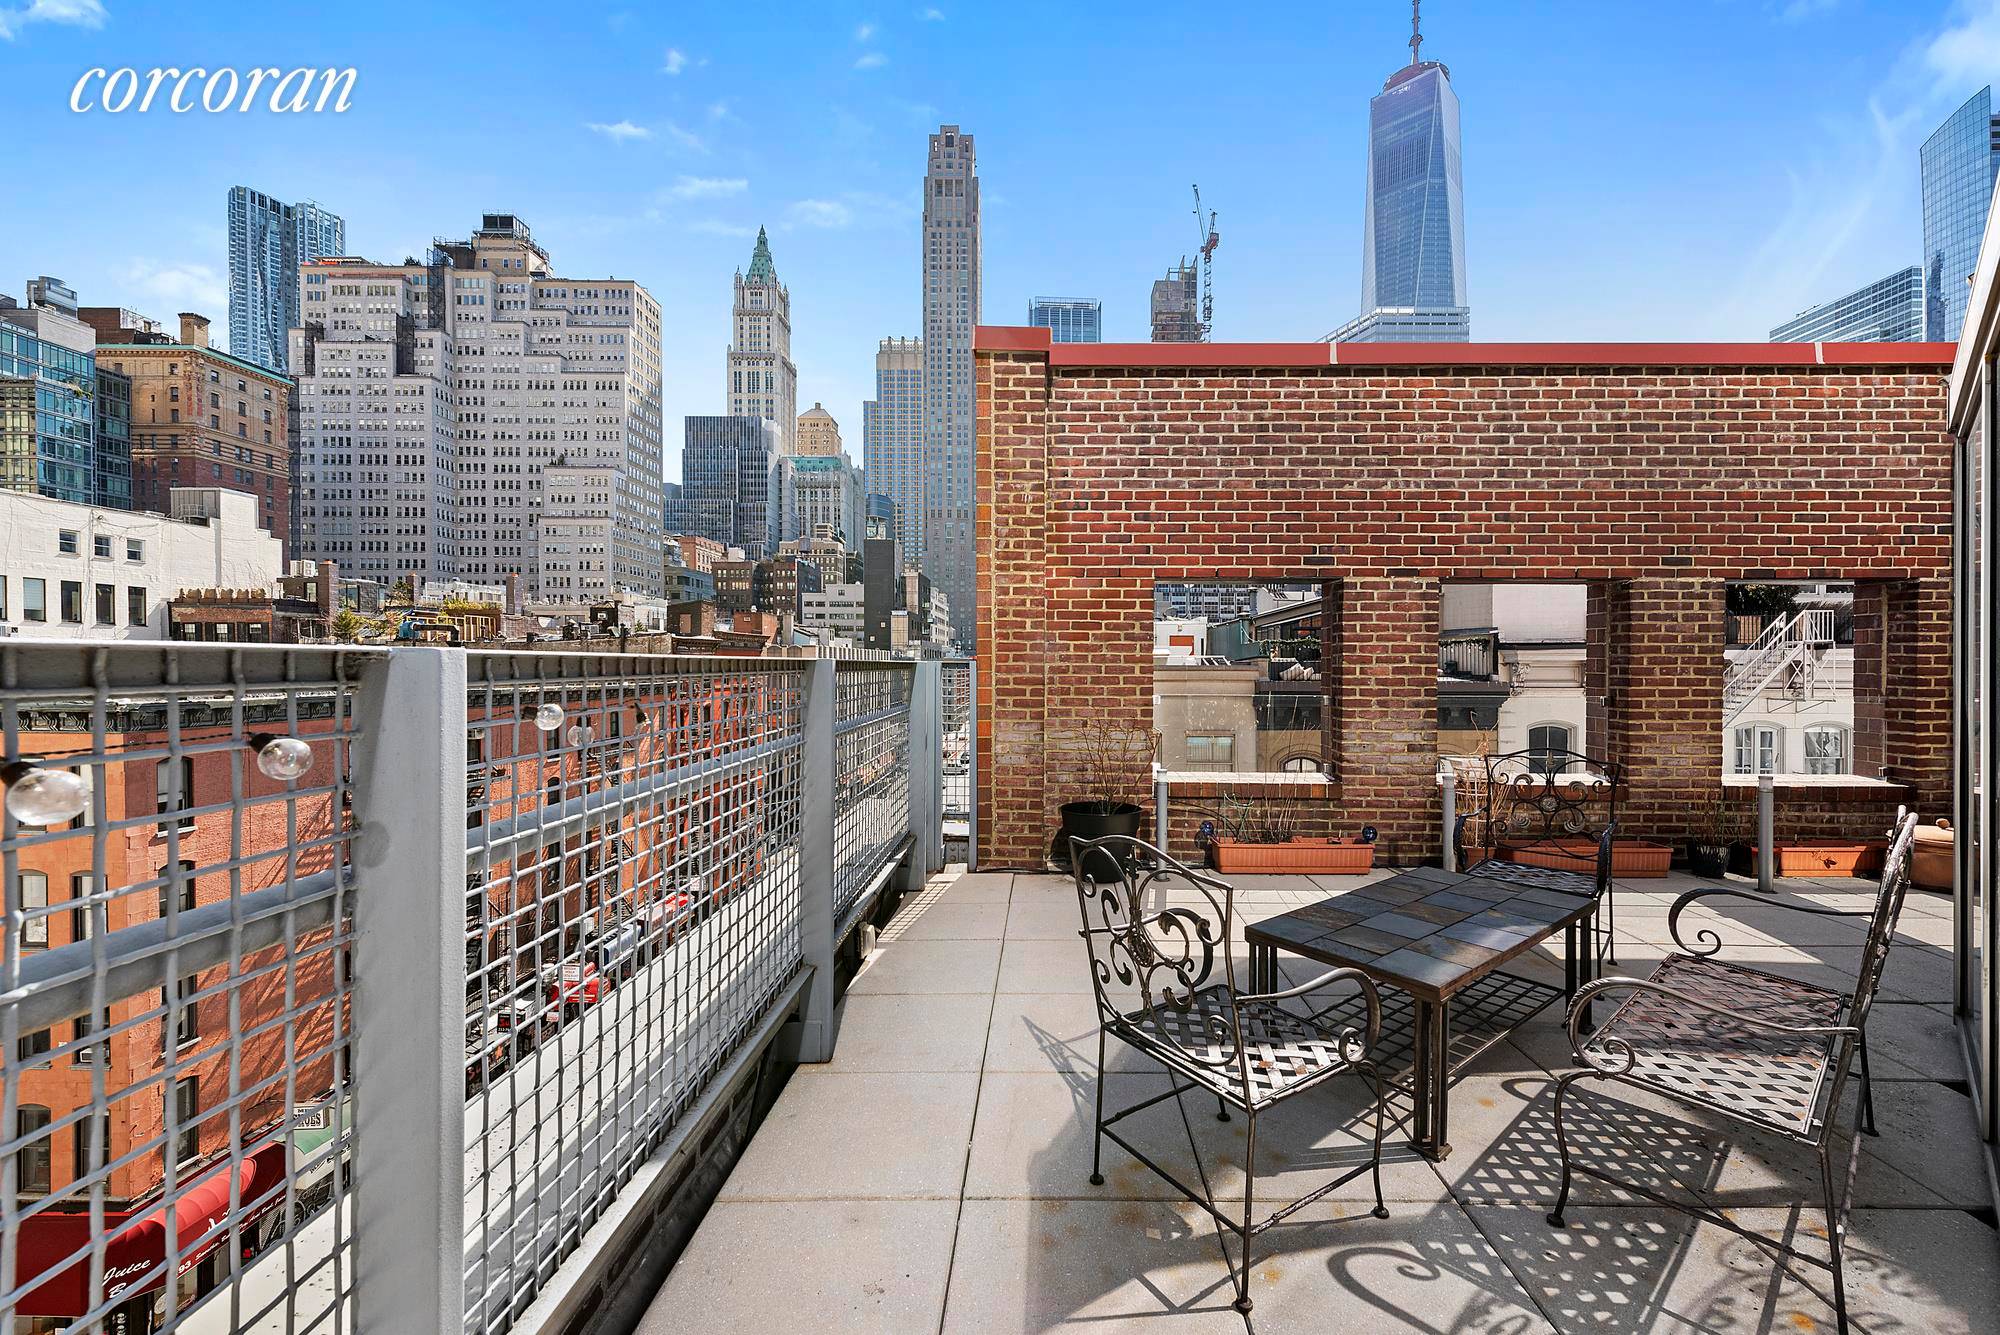 Featuring two of the most remarkable terraces in the city, this three bedroom, two and a half bathroom penthouse duplex is an unrivaled Tribeca sanctuary in a contemporary condominium building.